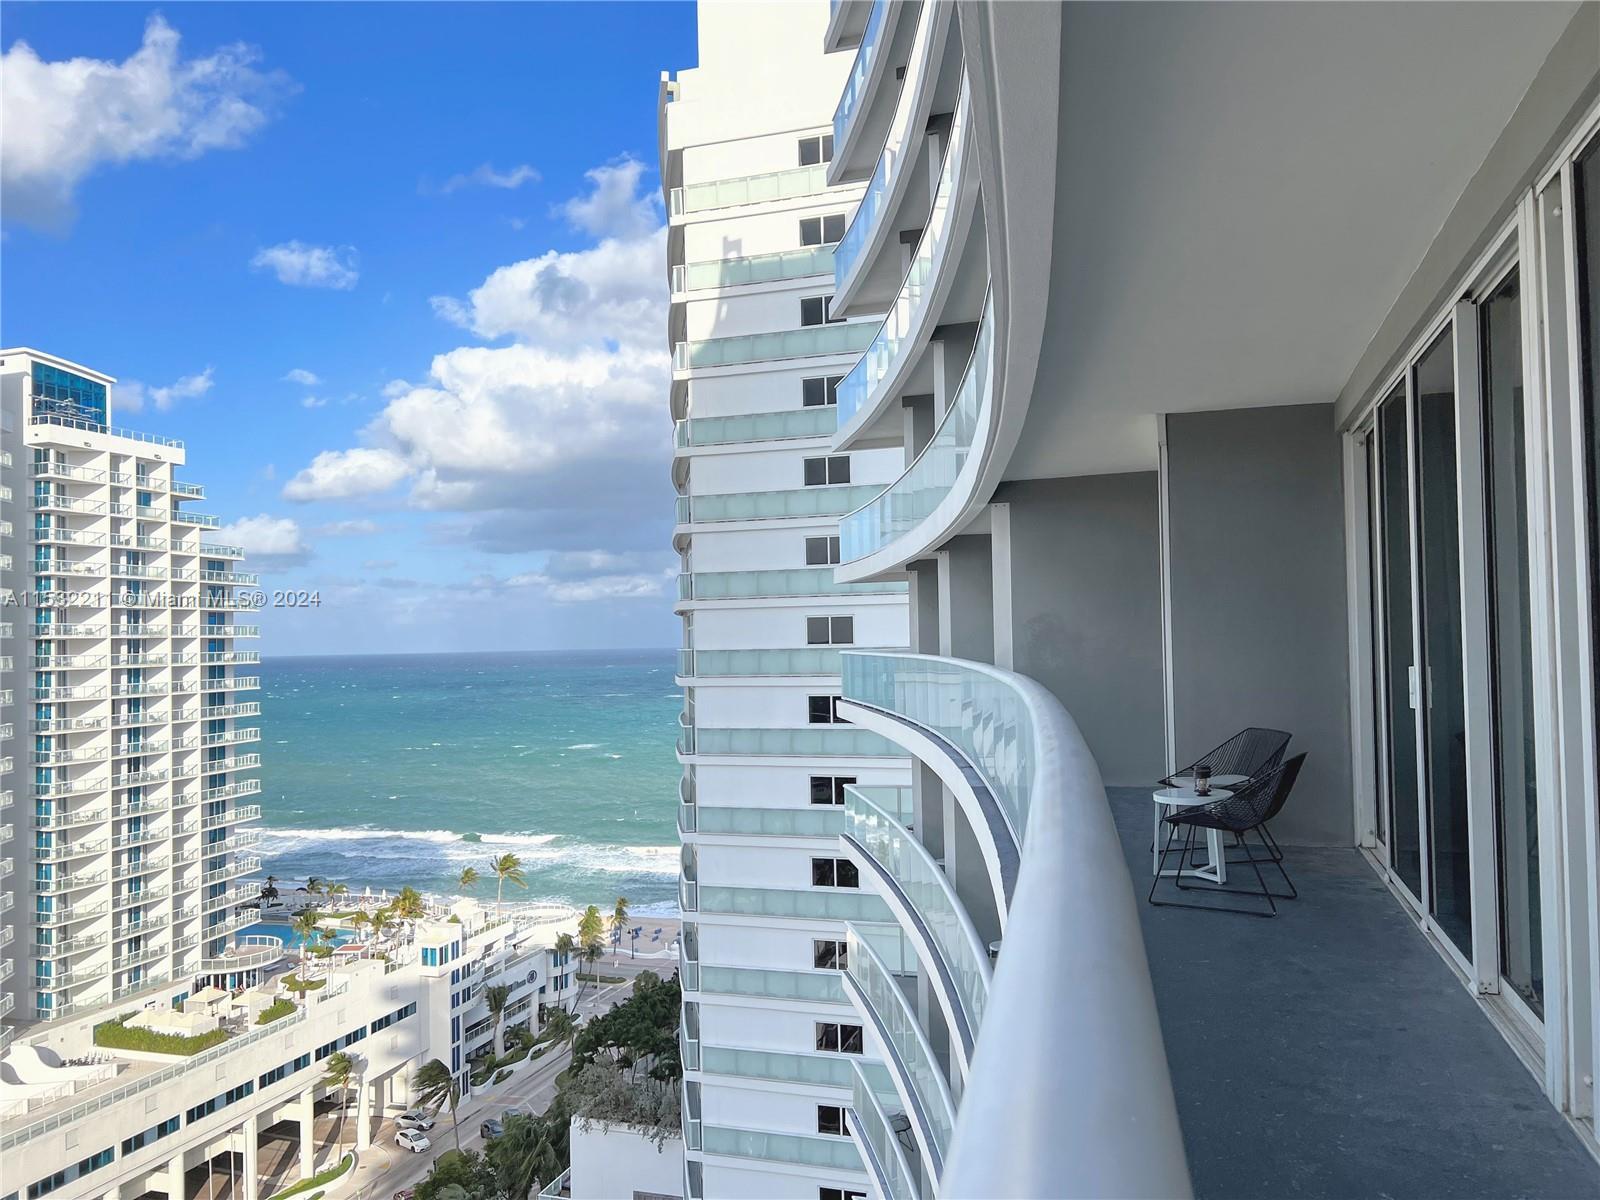 Photo of 3101 Bayshore Dr #1806 in Fort Lauderdale, FL